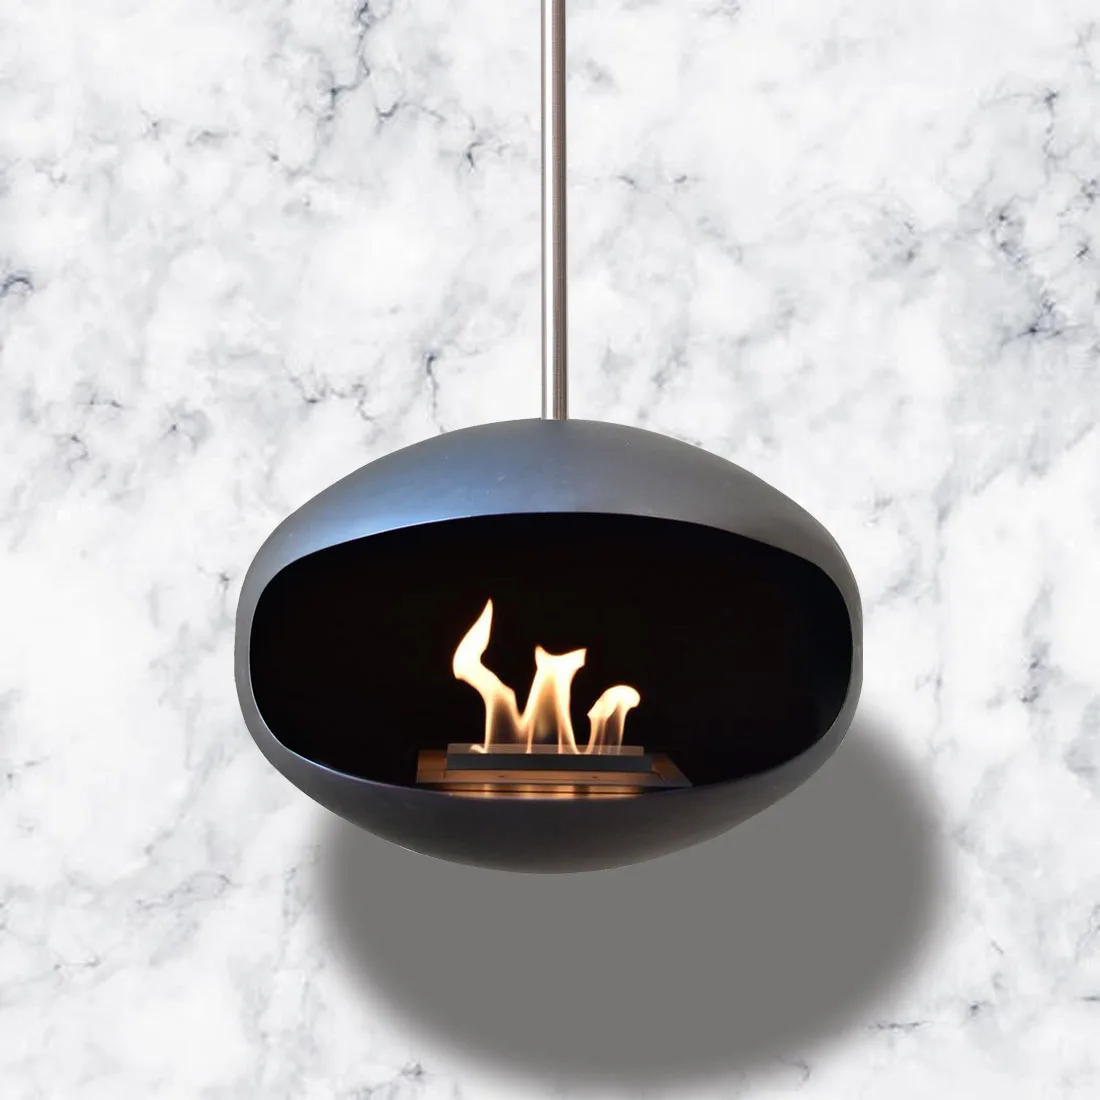 Hot Sale Cl 14 Hanging Fireplace Price Ceiling Bioethanol Fireplace Buy Hanging Fireplace Price Ceiling Bioethanol Fireplace Suspended Fireplace Product On Alibaba Com